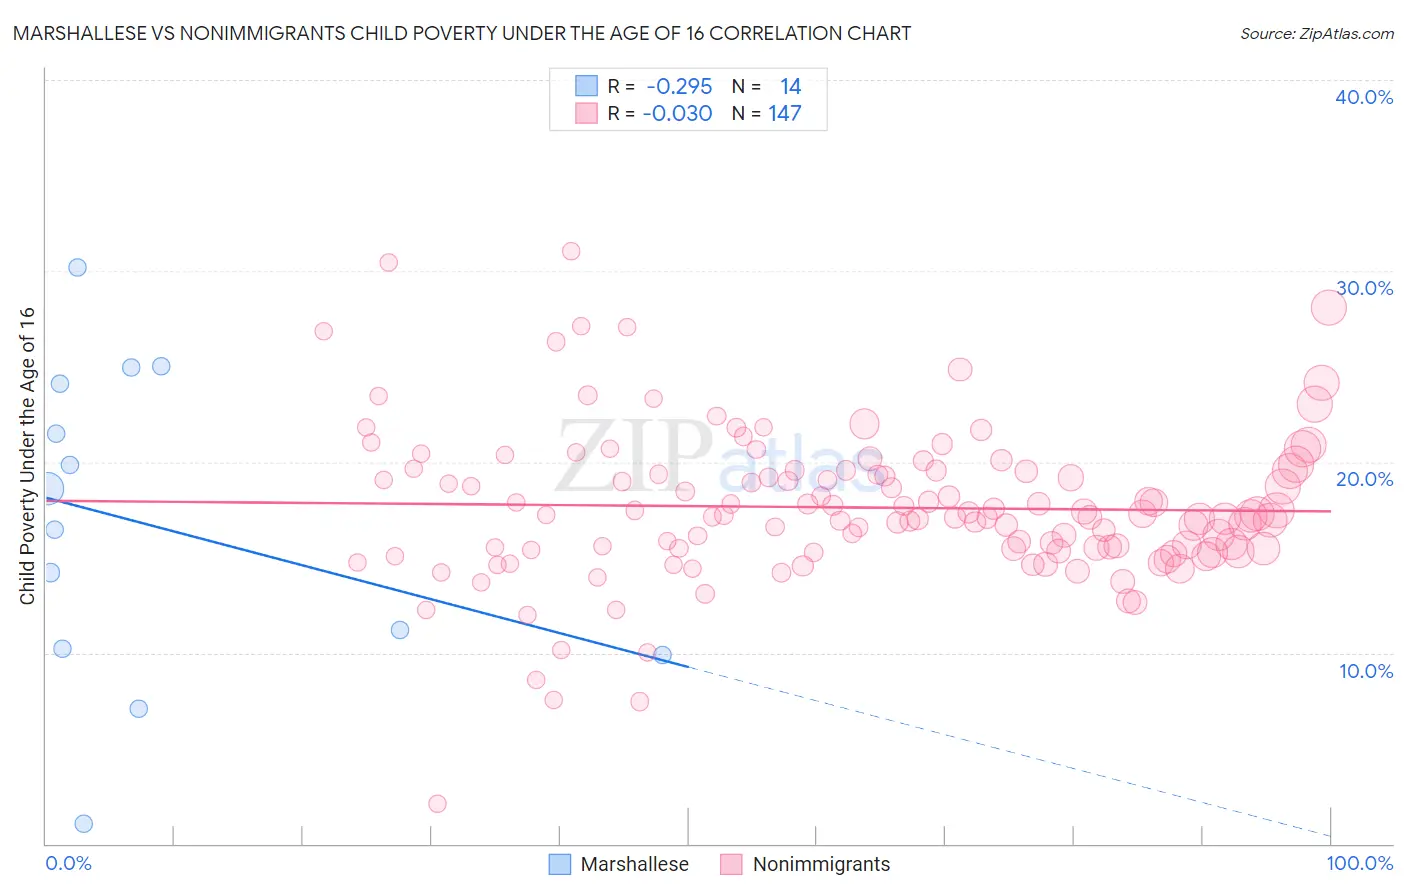 Marshallese vs Nonimmigrants Child Poverty Under the Age of 16